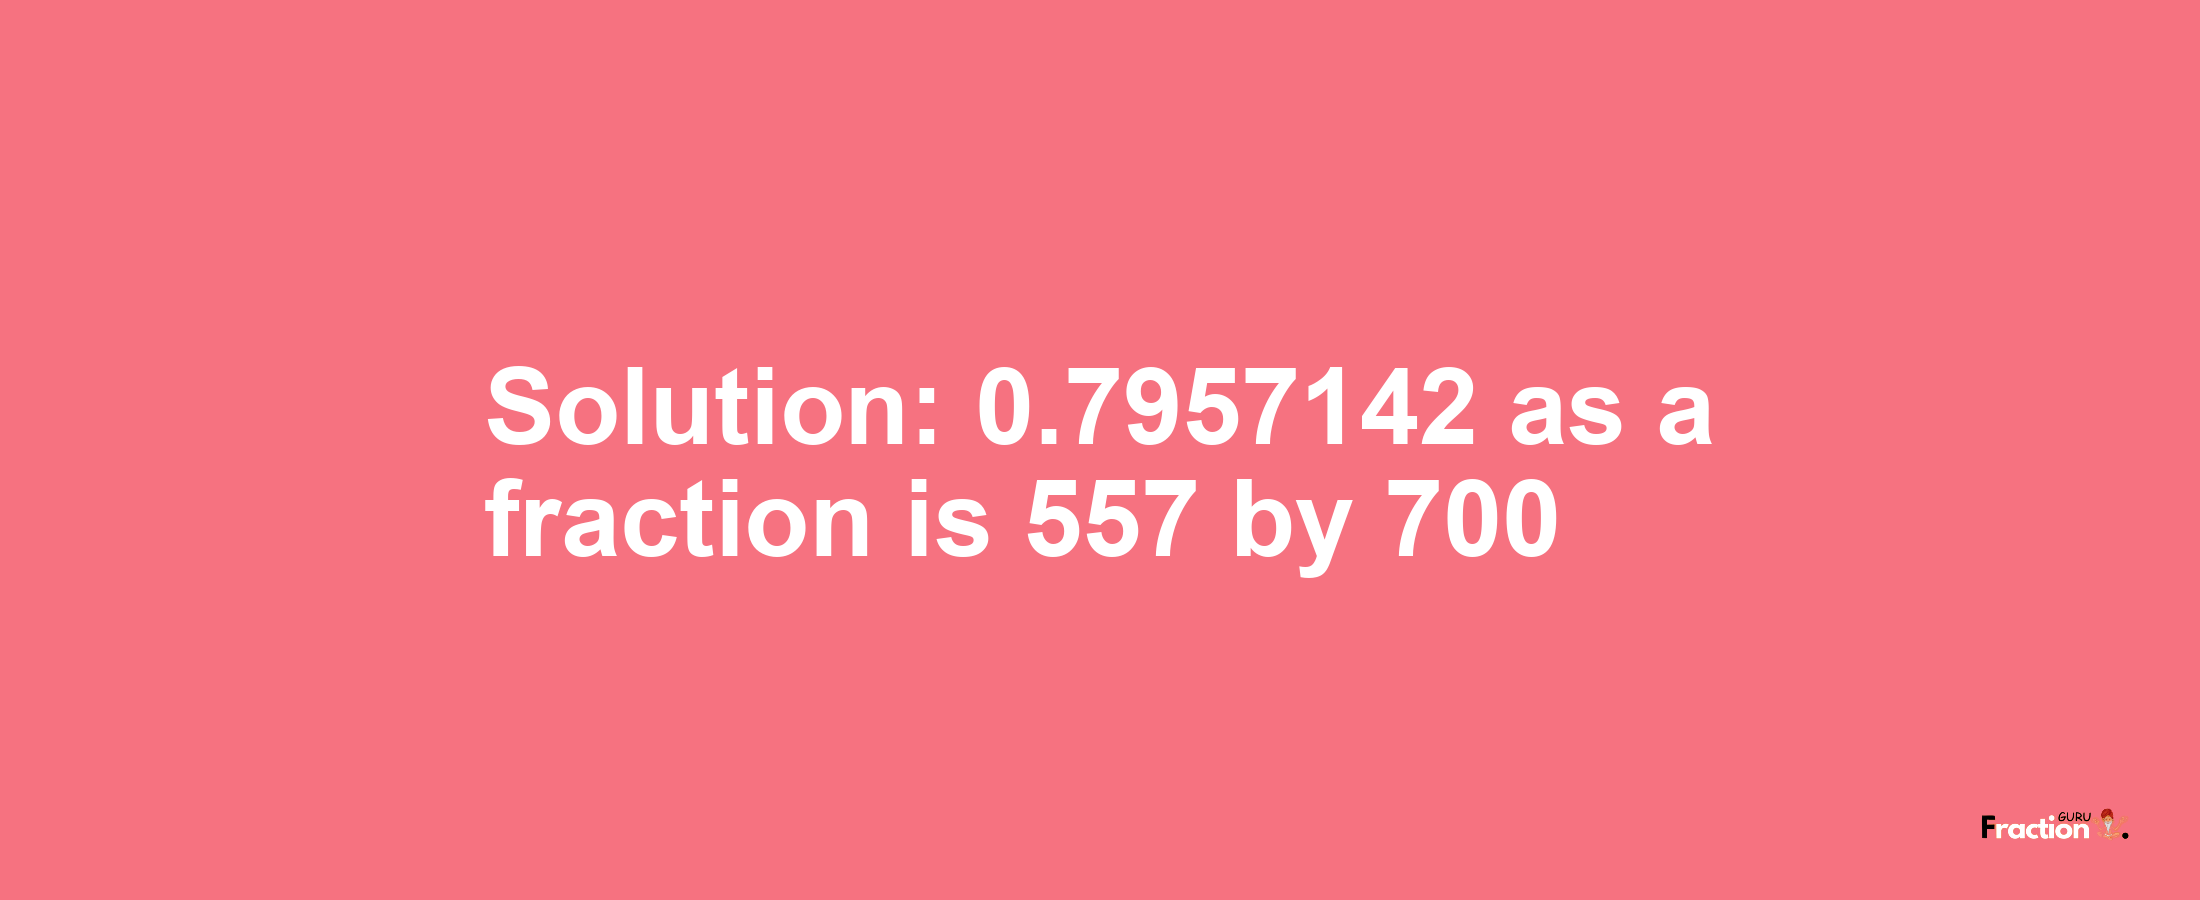 Solution:0.7957142 as a fraction is 557/700